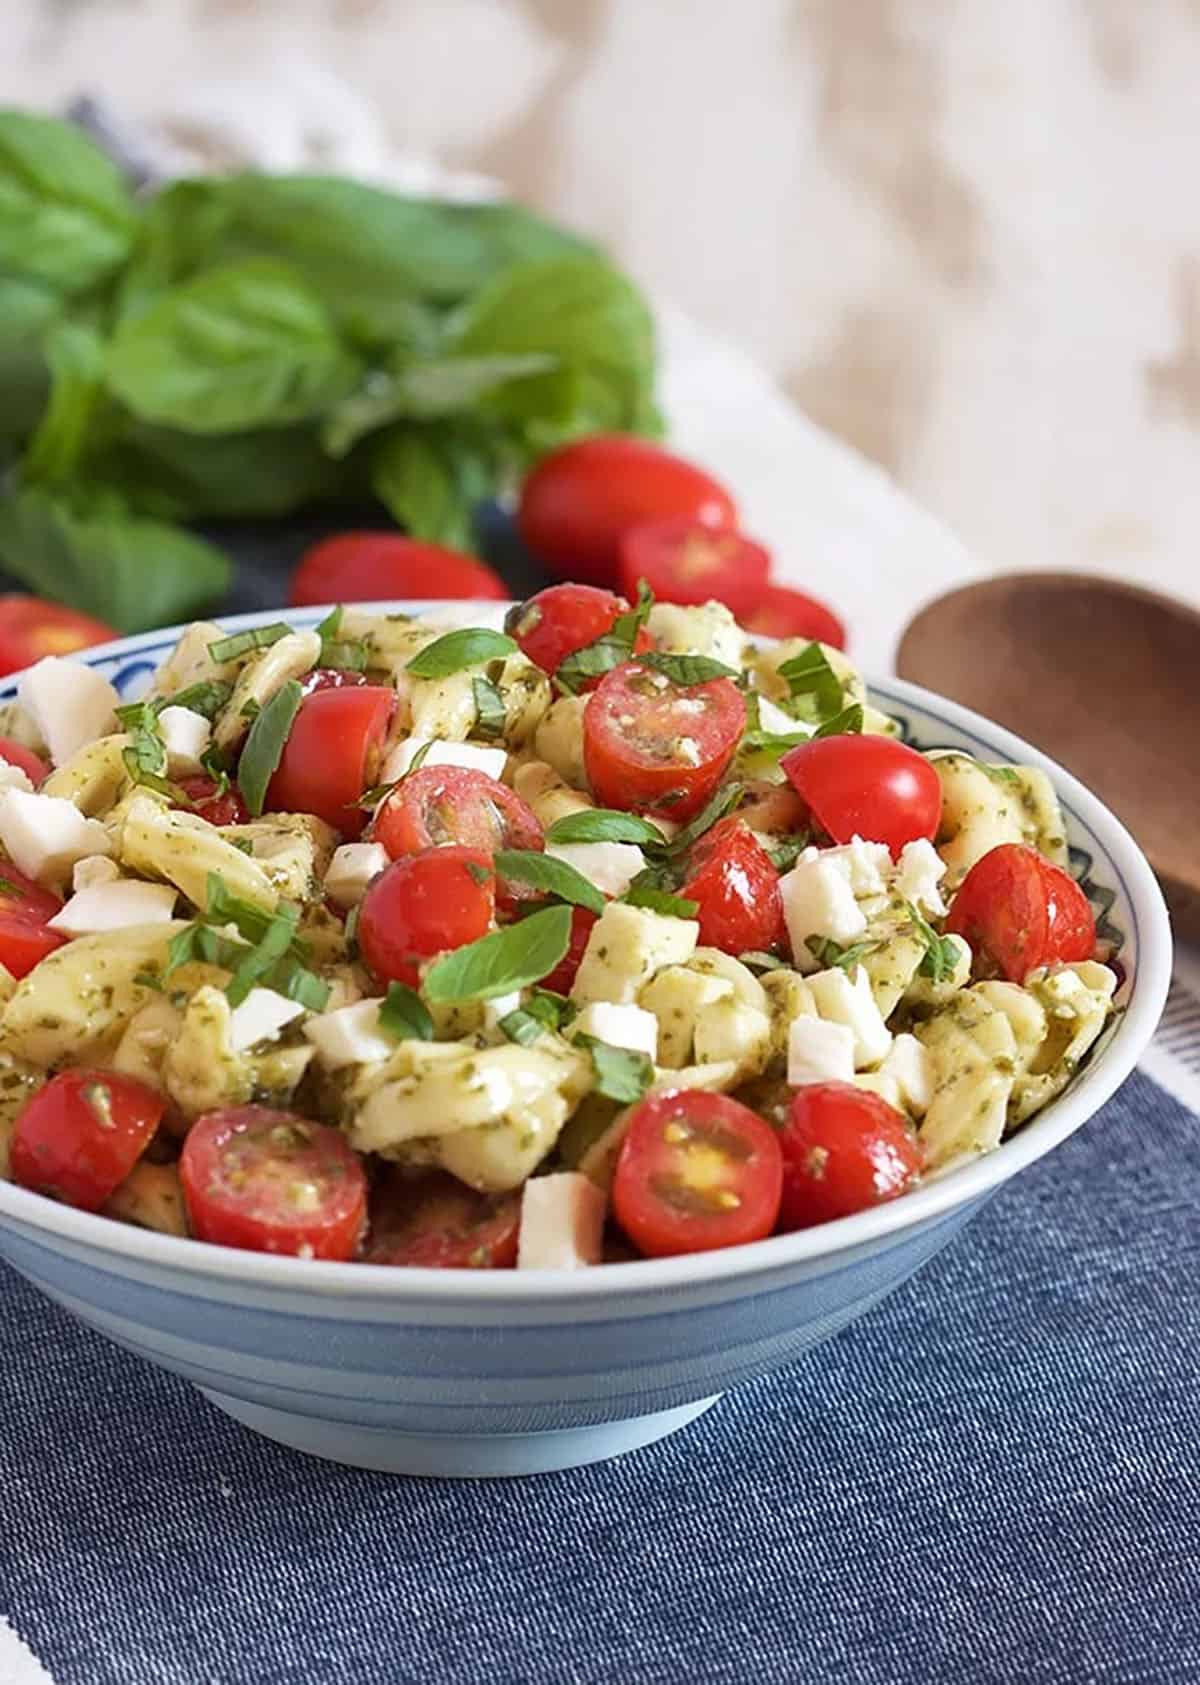 Bowl of Caprese Tortellini salad with basil and tomatoes in the background.